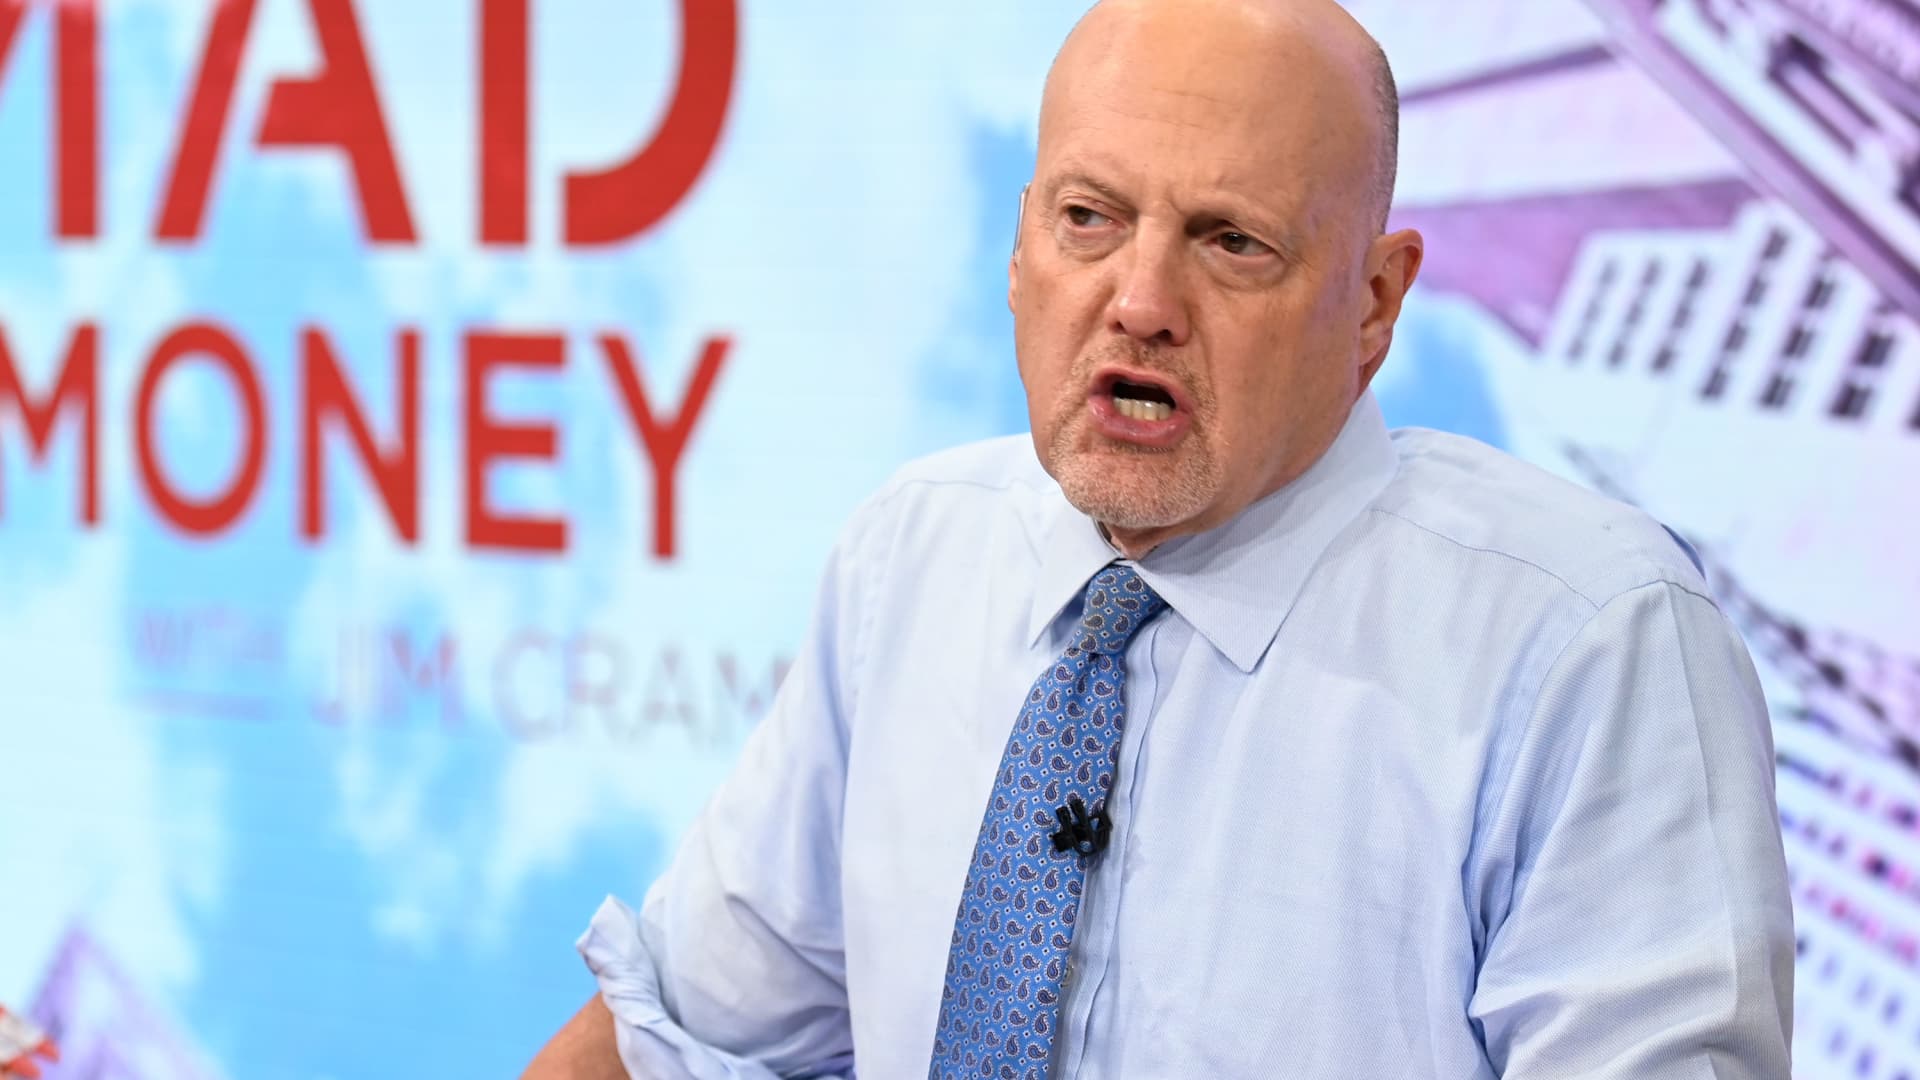 Jim Cramer says Constellation Energy and Sempra Energy are dependable utility stocks